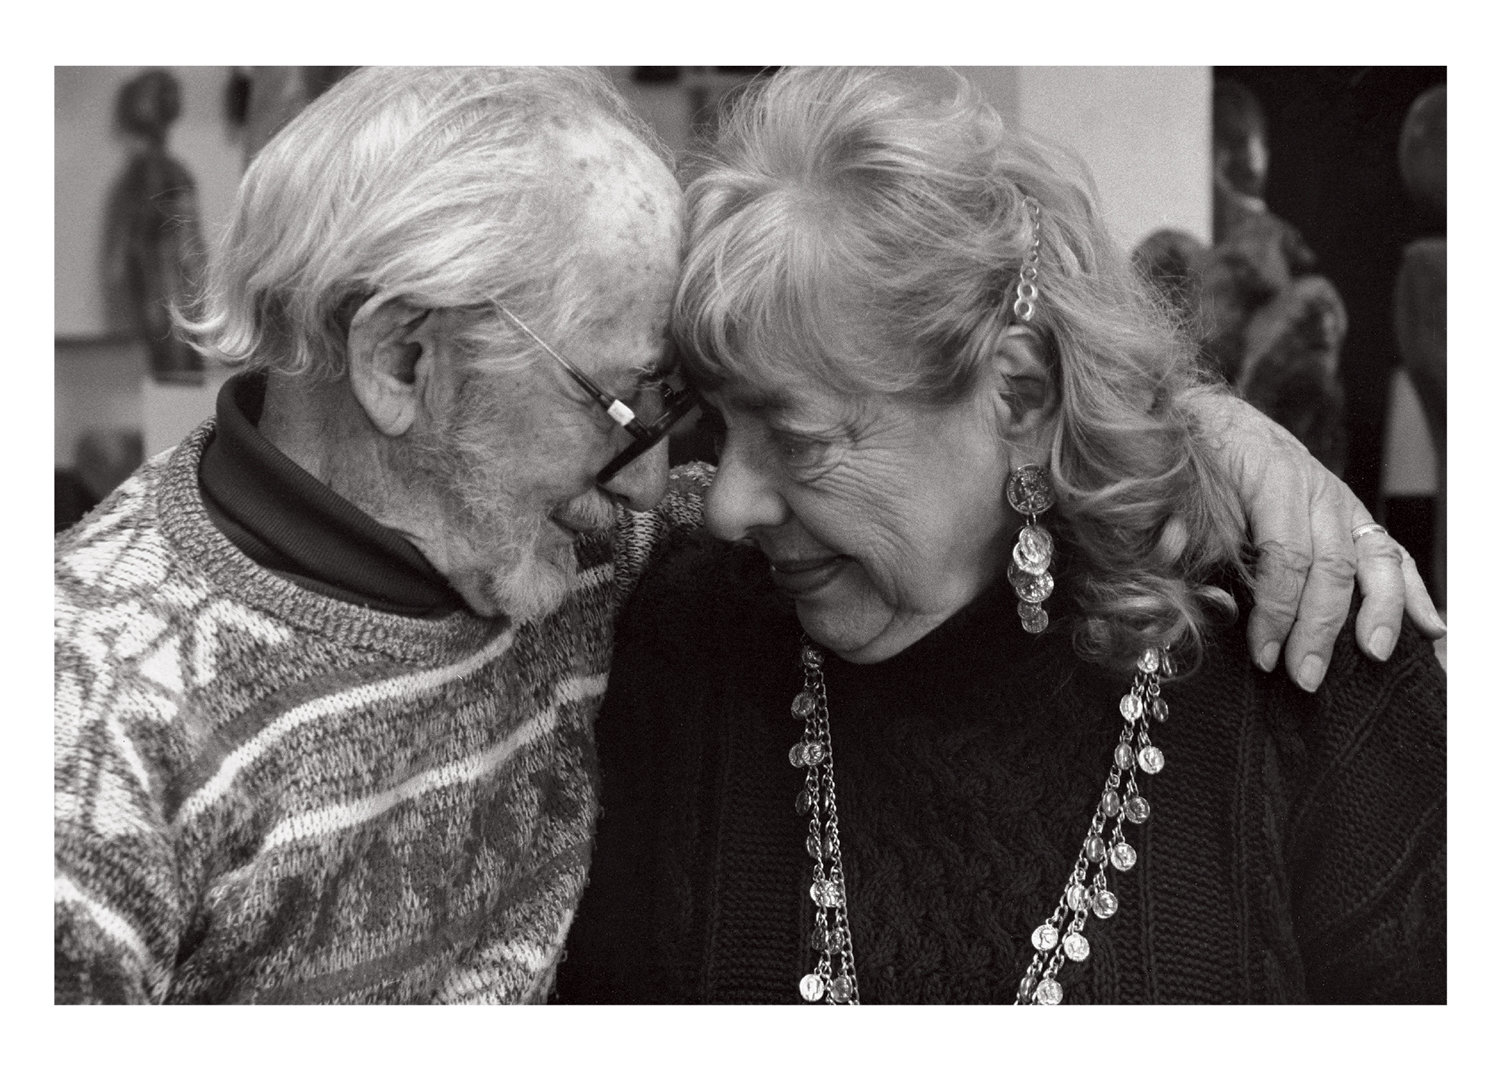 Bernie and Honey, artists who care as much about each other as they do their work, warmly embrace each other for a portrait by Robert Fass, part of the series ‘As Long As We Both Shall Live.’